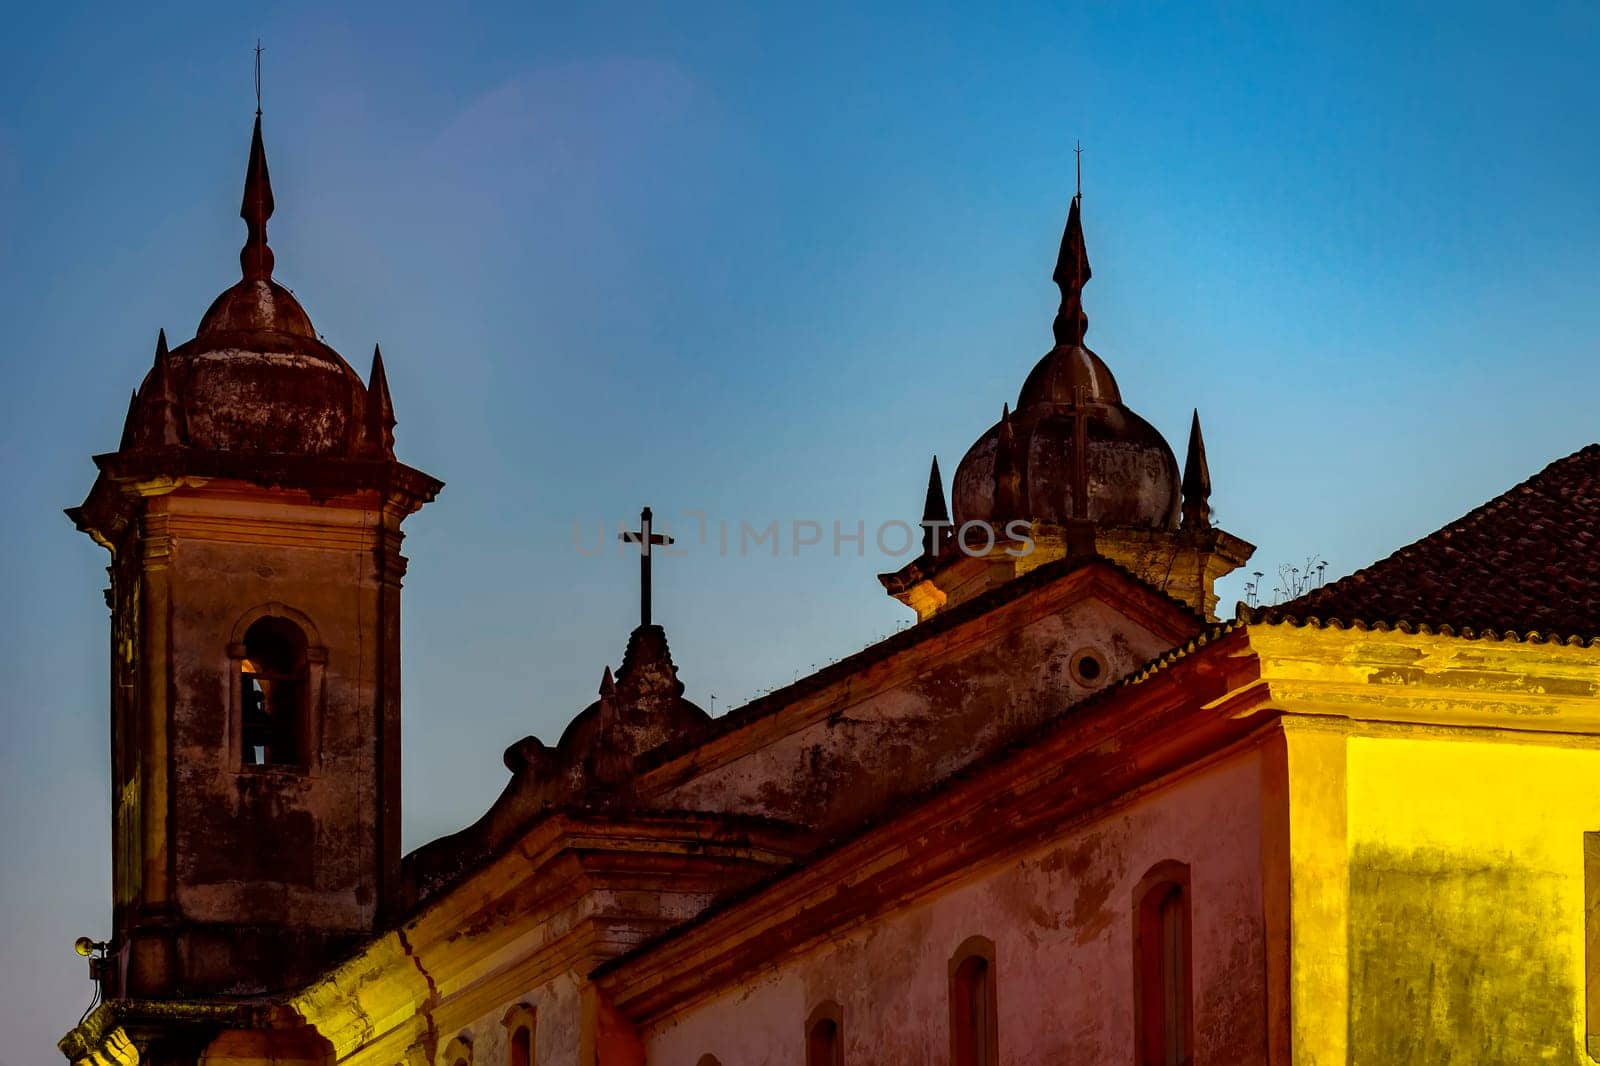 Back view at night of old and historic church in colonial architecture from the 18th century in the city of Ouro Preto in Minas Gerais, Brazil